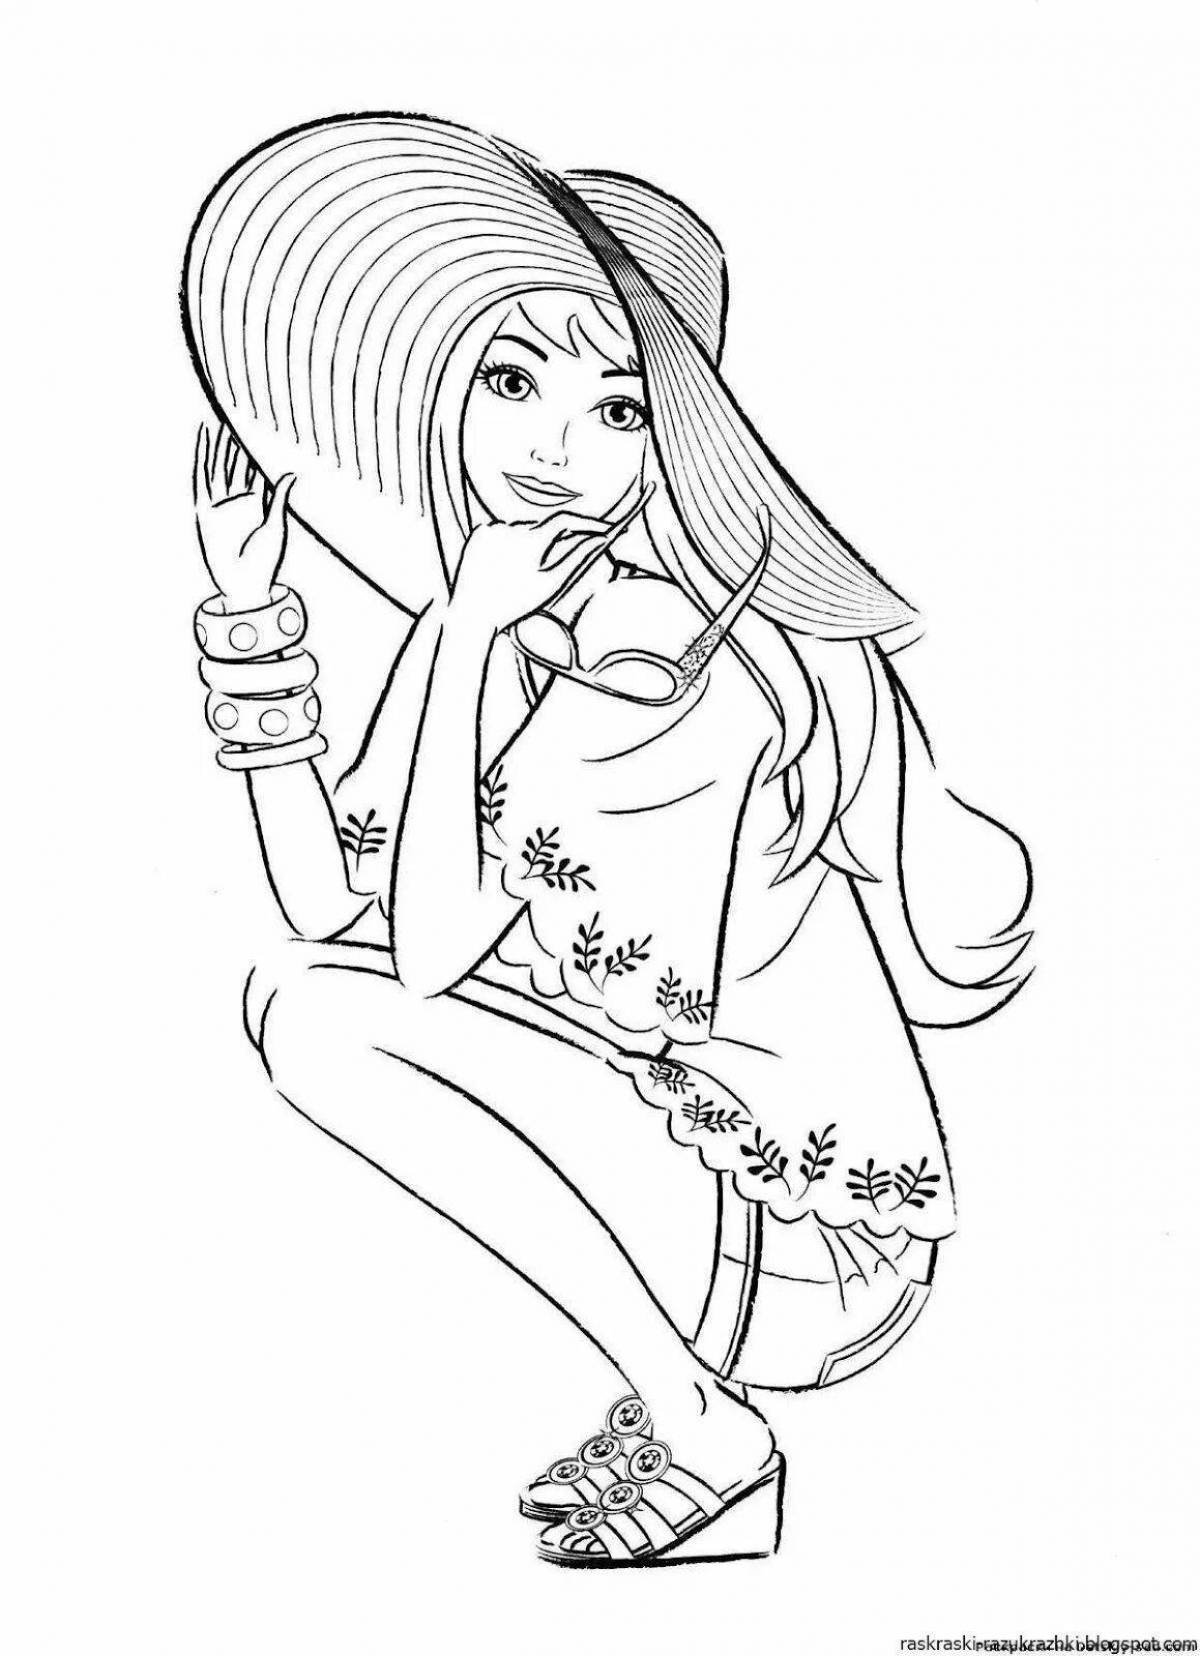 Coloring pages stylish girls - unusual